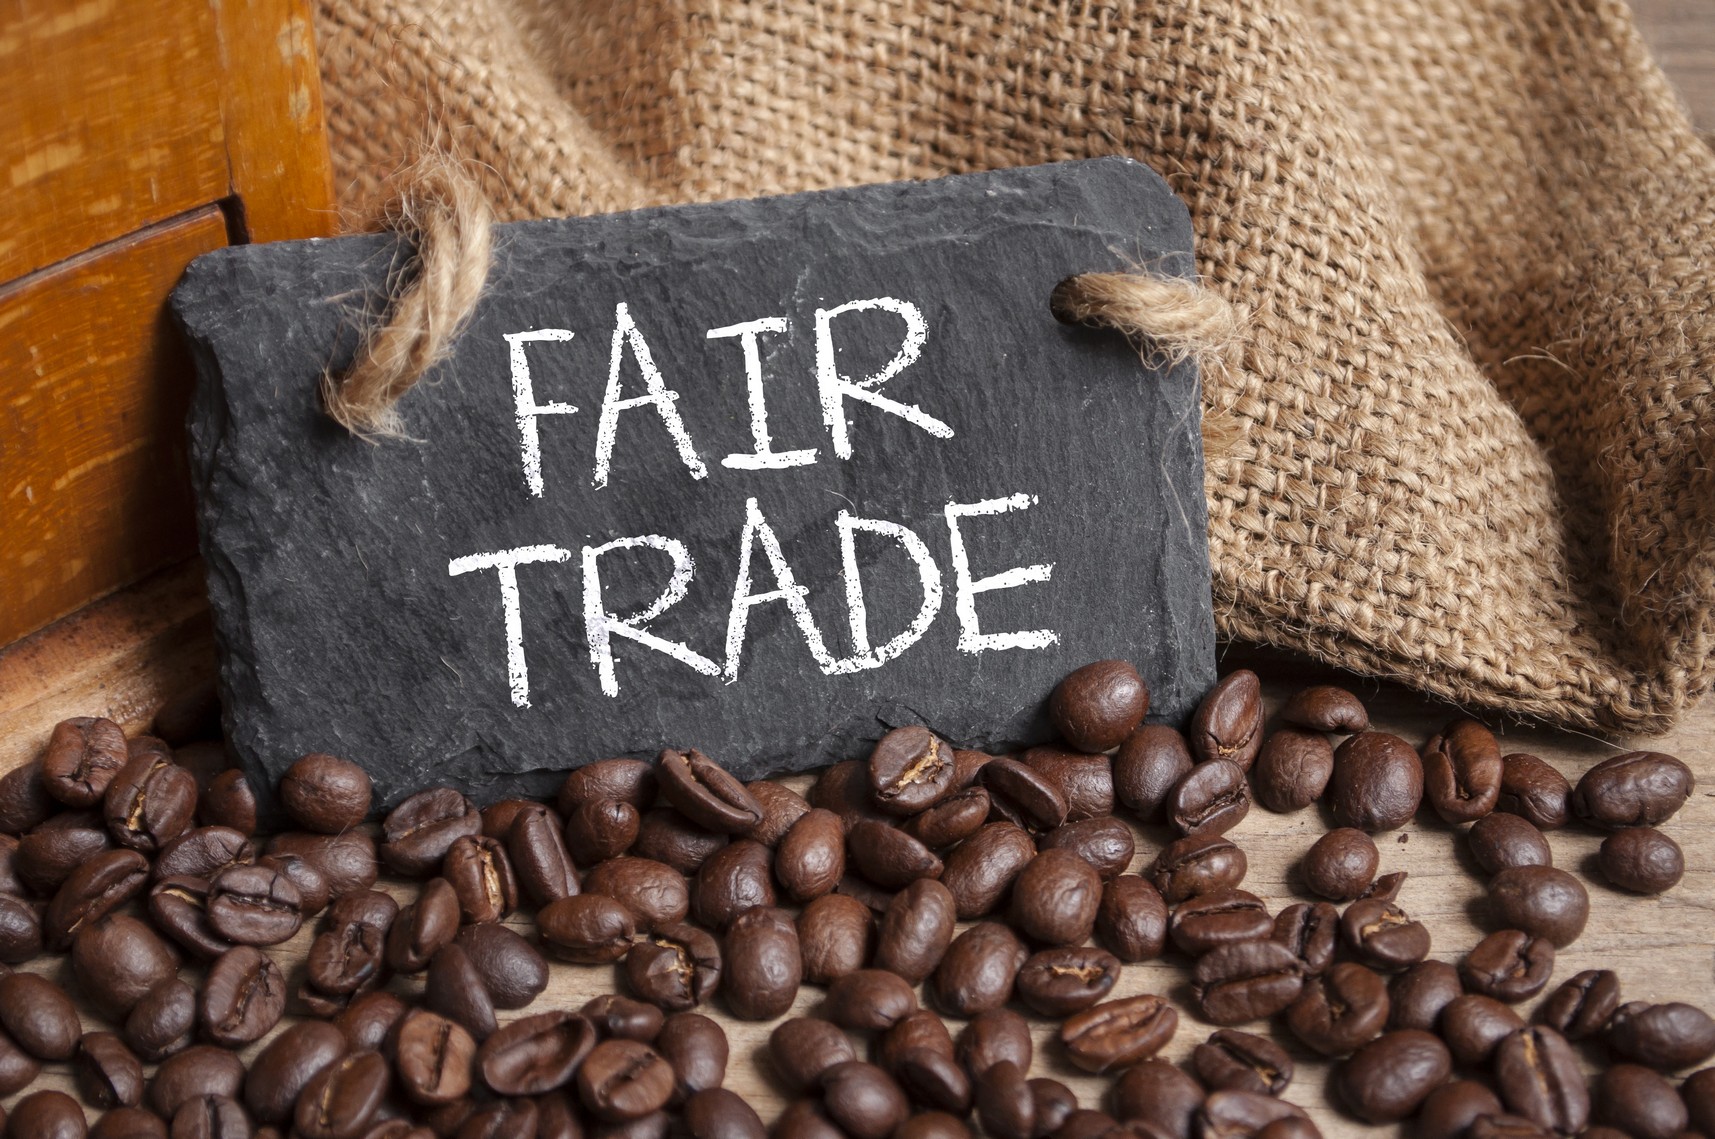 Coffee Trends Benefit Green Bay and Northeast Wisconsin